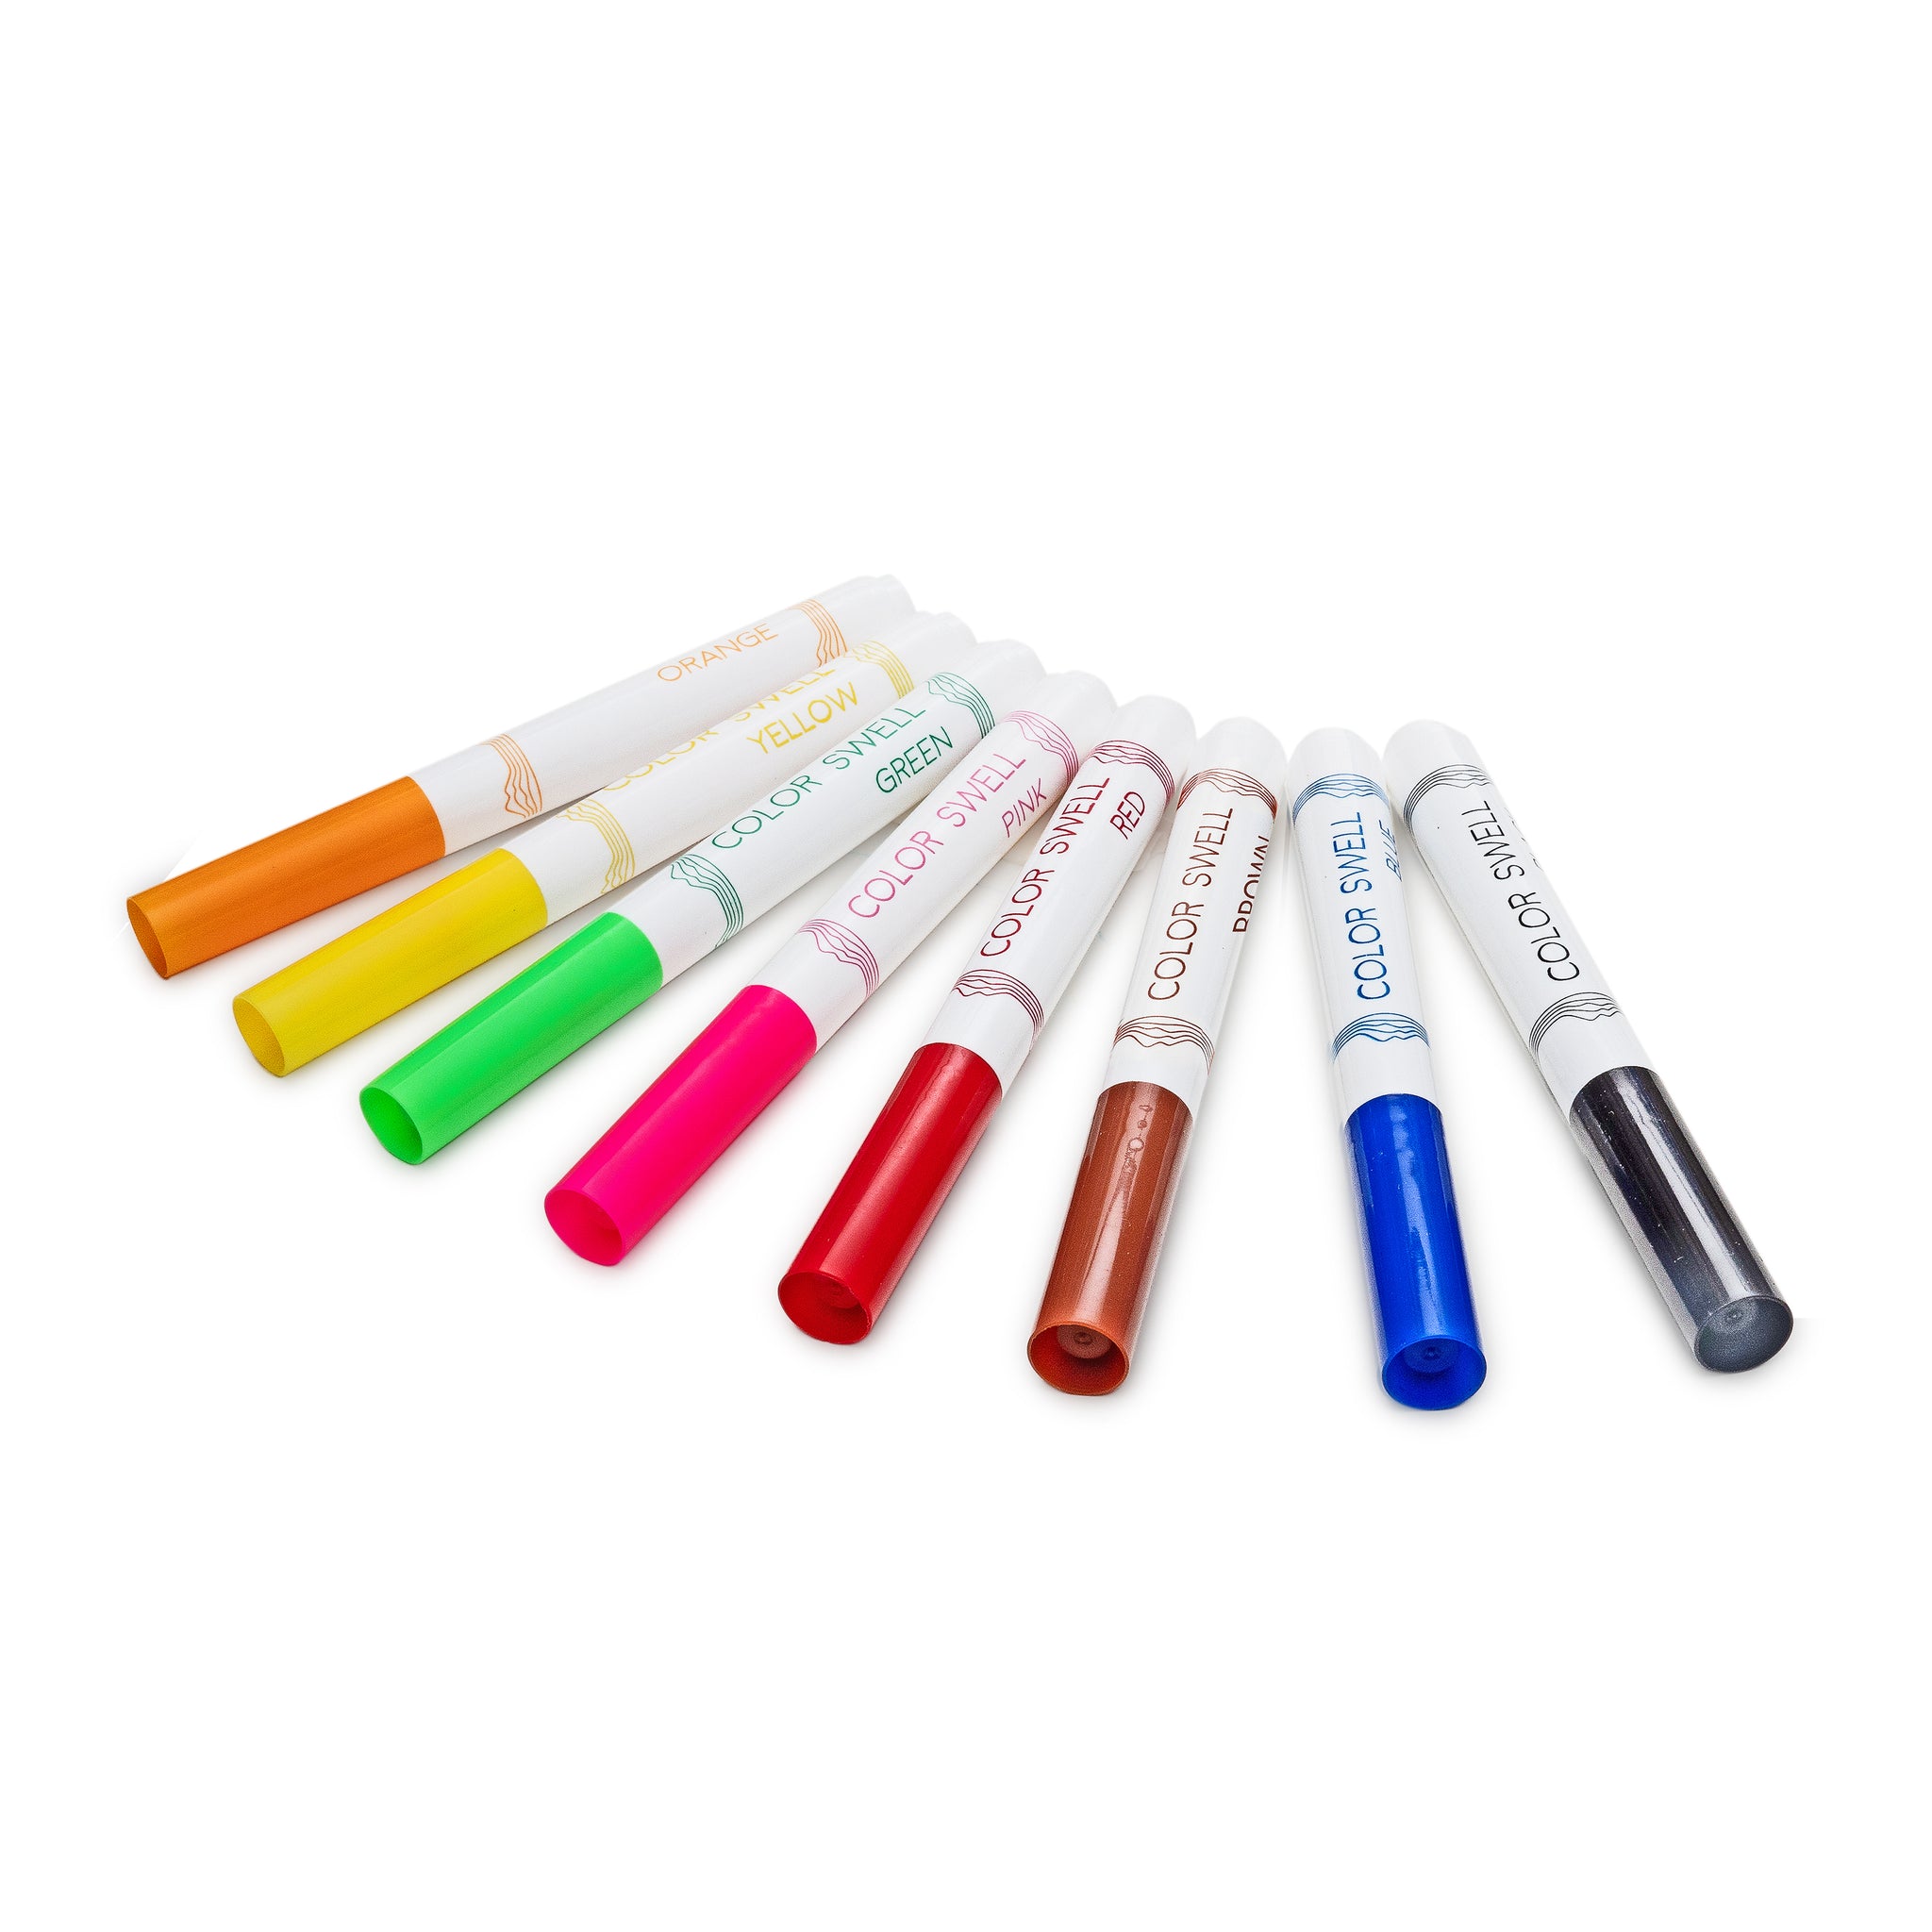 Color Swell Washable Markers Bulk 18 Pack, 8 markers per pack, 144 total markers  in bulk 